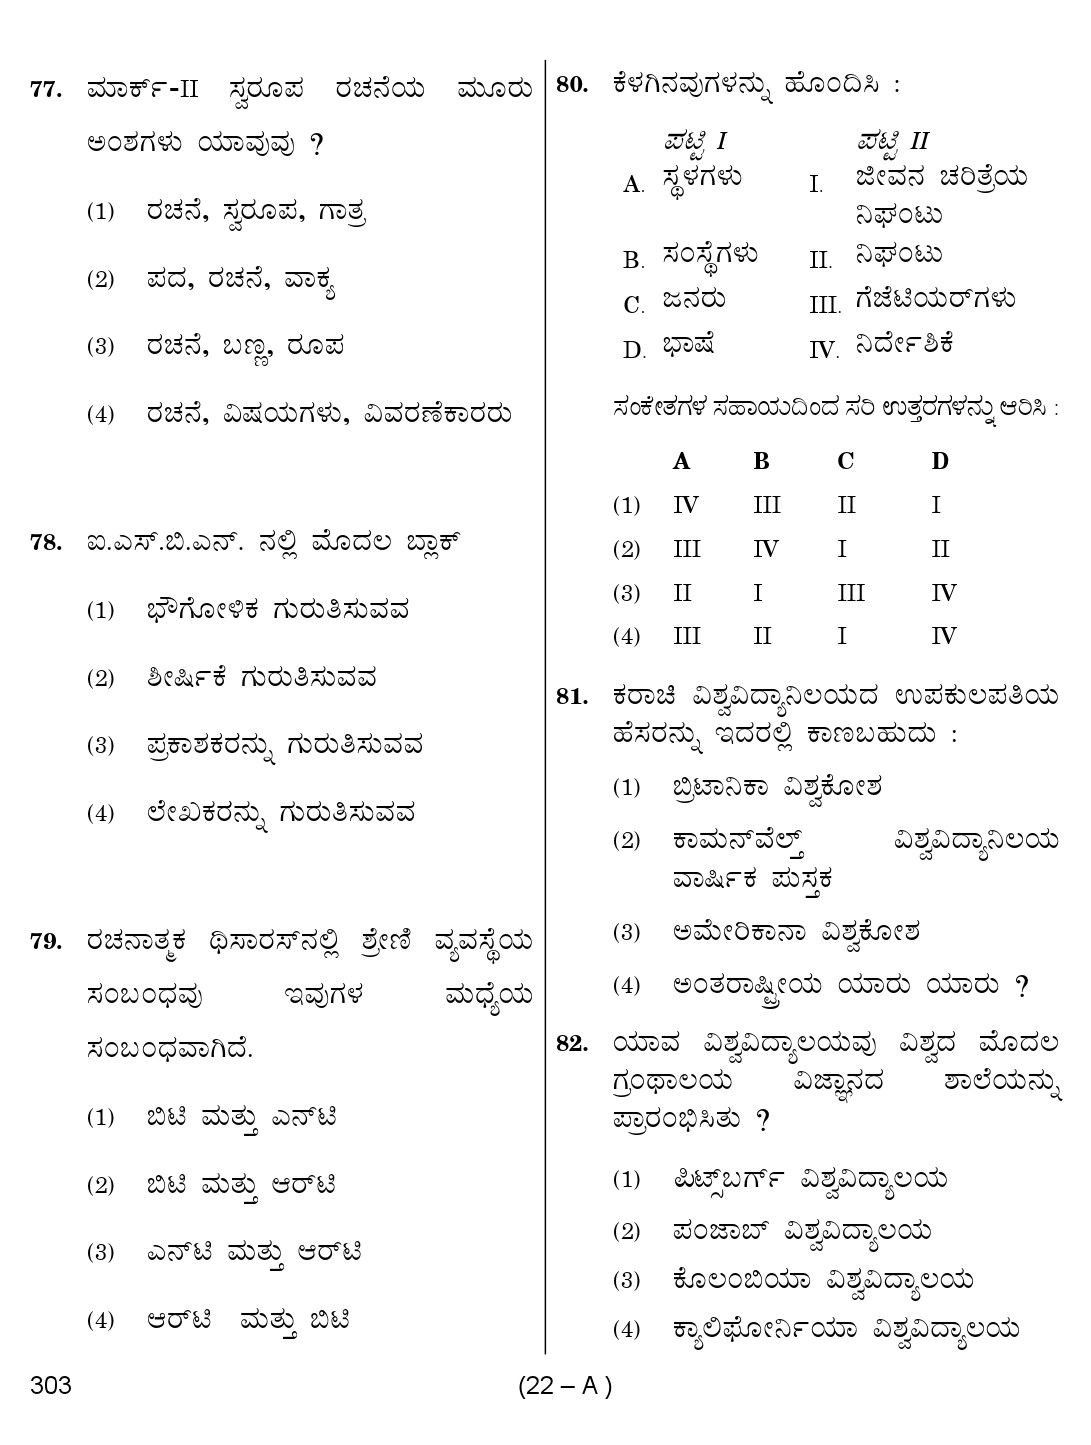 Karnataka PSC 303 Specific Paper II Librarian Exam Sample Question Paper 22